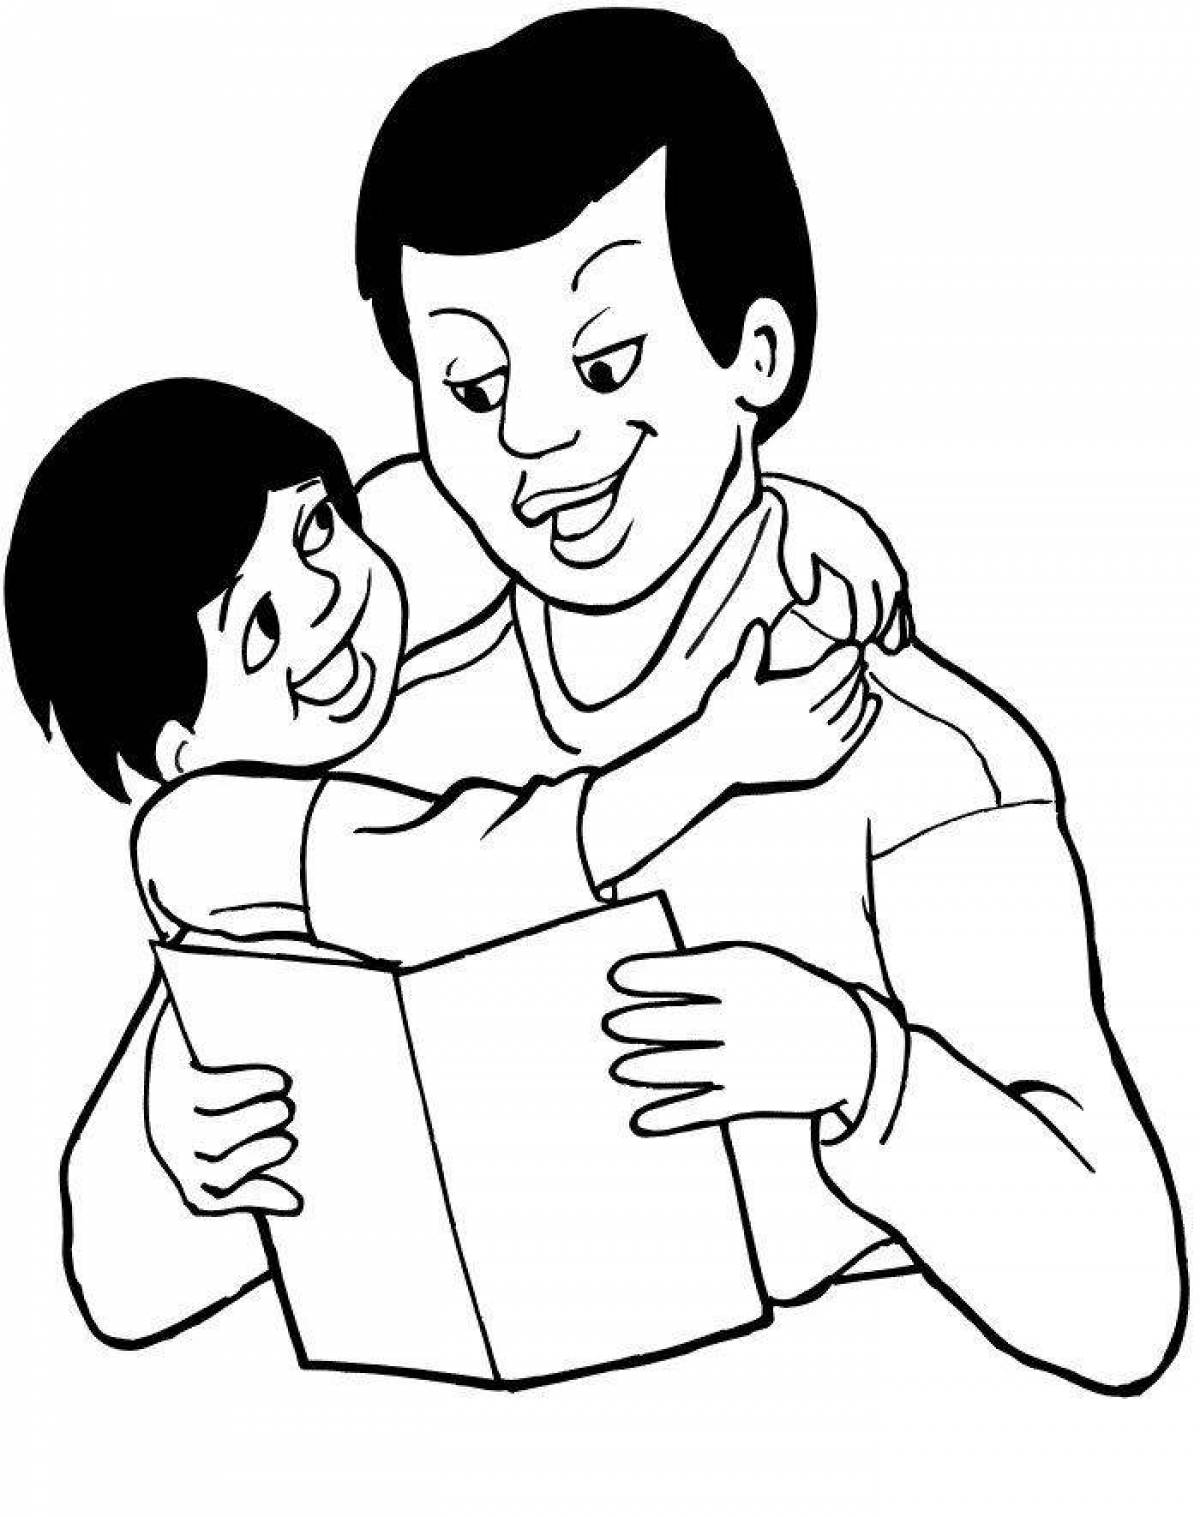 Violent dad and daughter coloring book